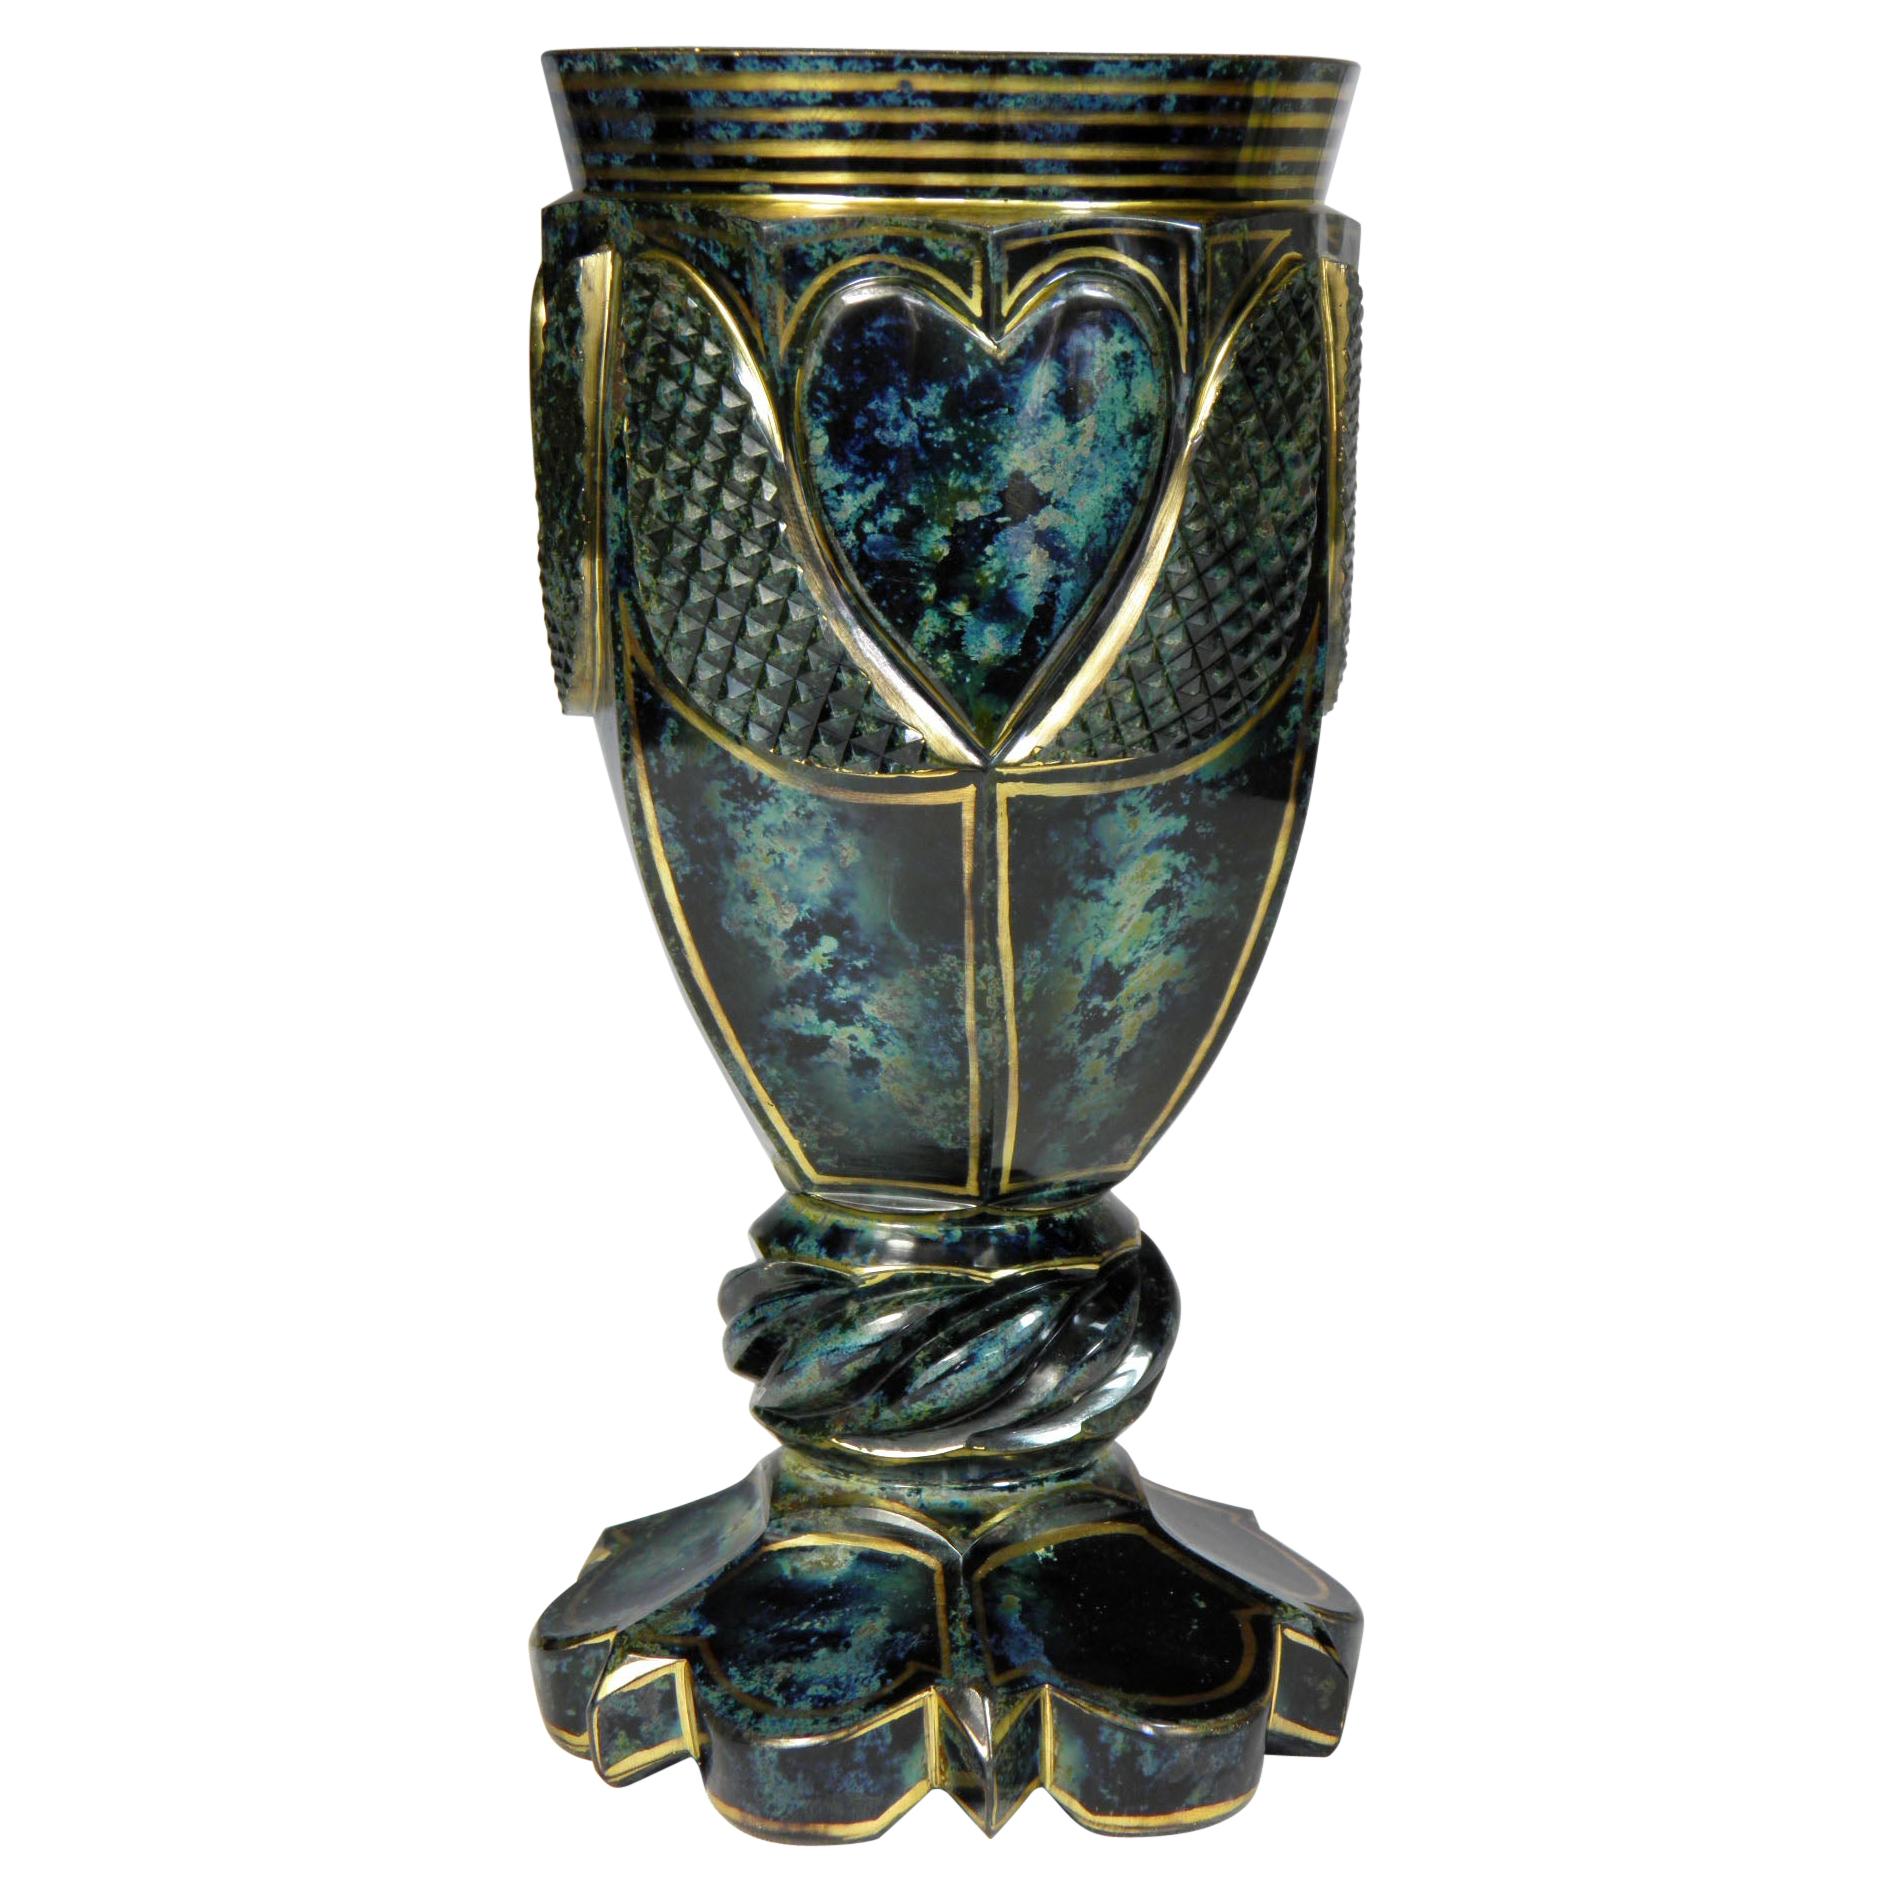 Unique Marble Glass Goblet from Lithyalin around 1900 Bohemian Glass